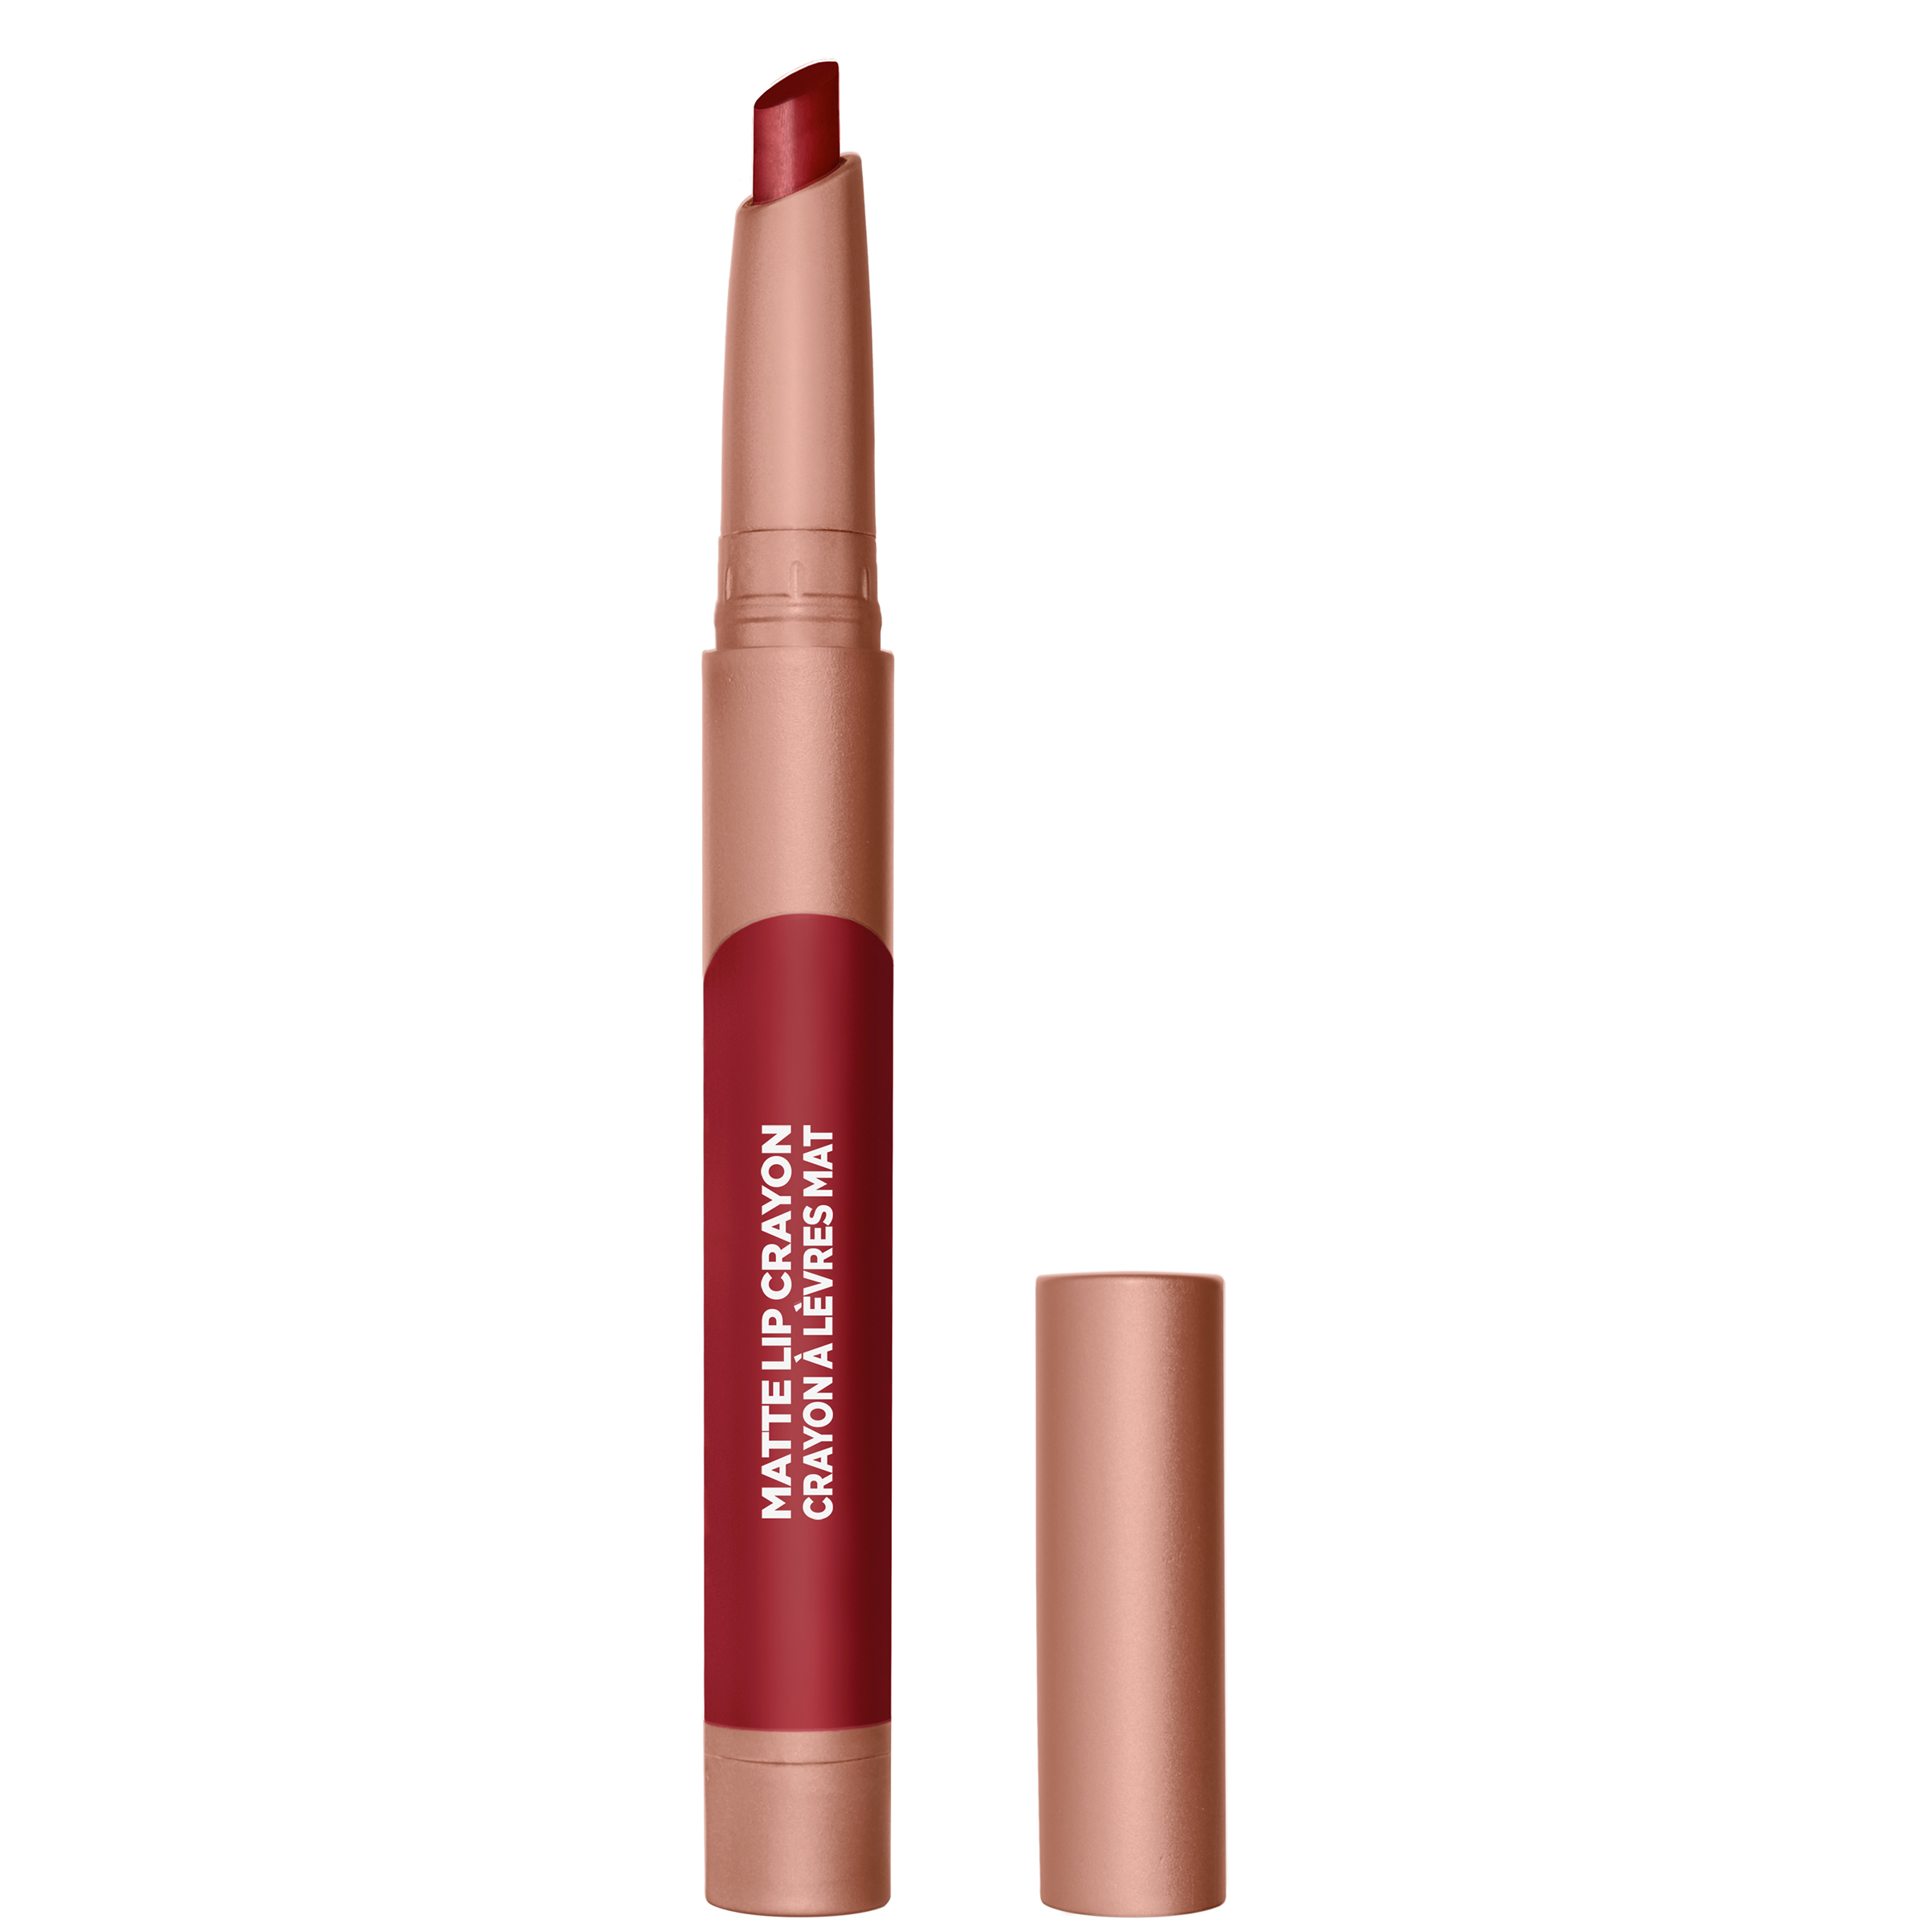 L'Oreal Paris Infallible Matte Lip Crayon, Lasting Wear, Smudge Resistant, Brulee Everyday, 0.04 oz. - image 1 of 4